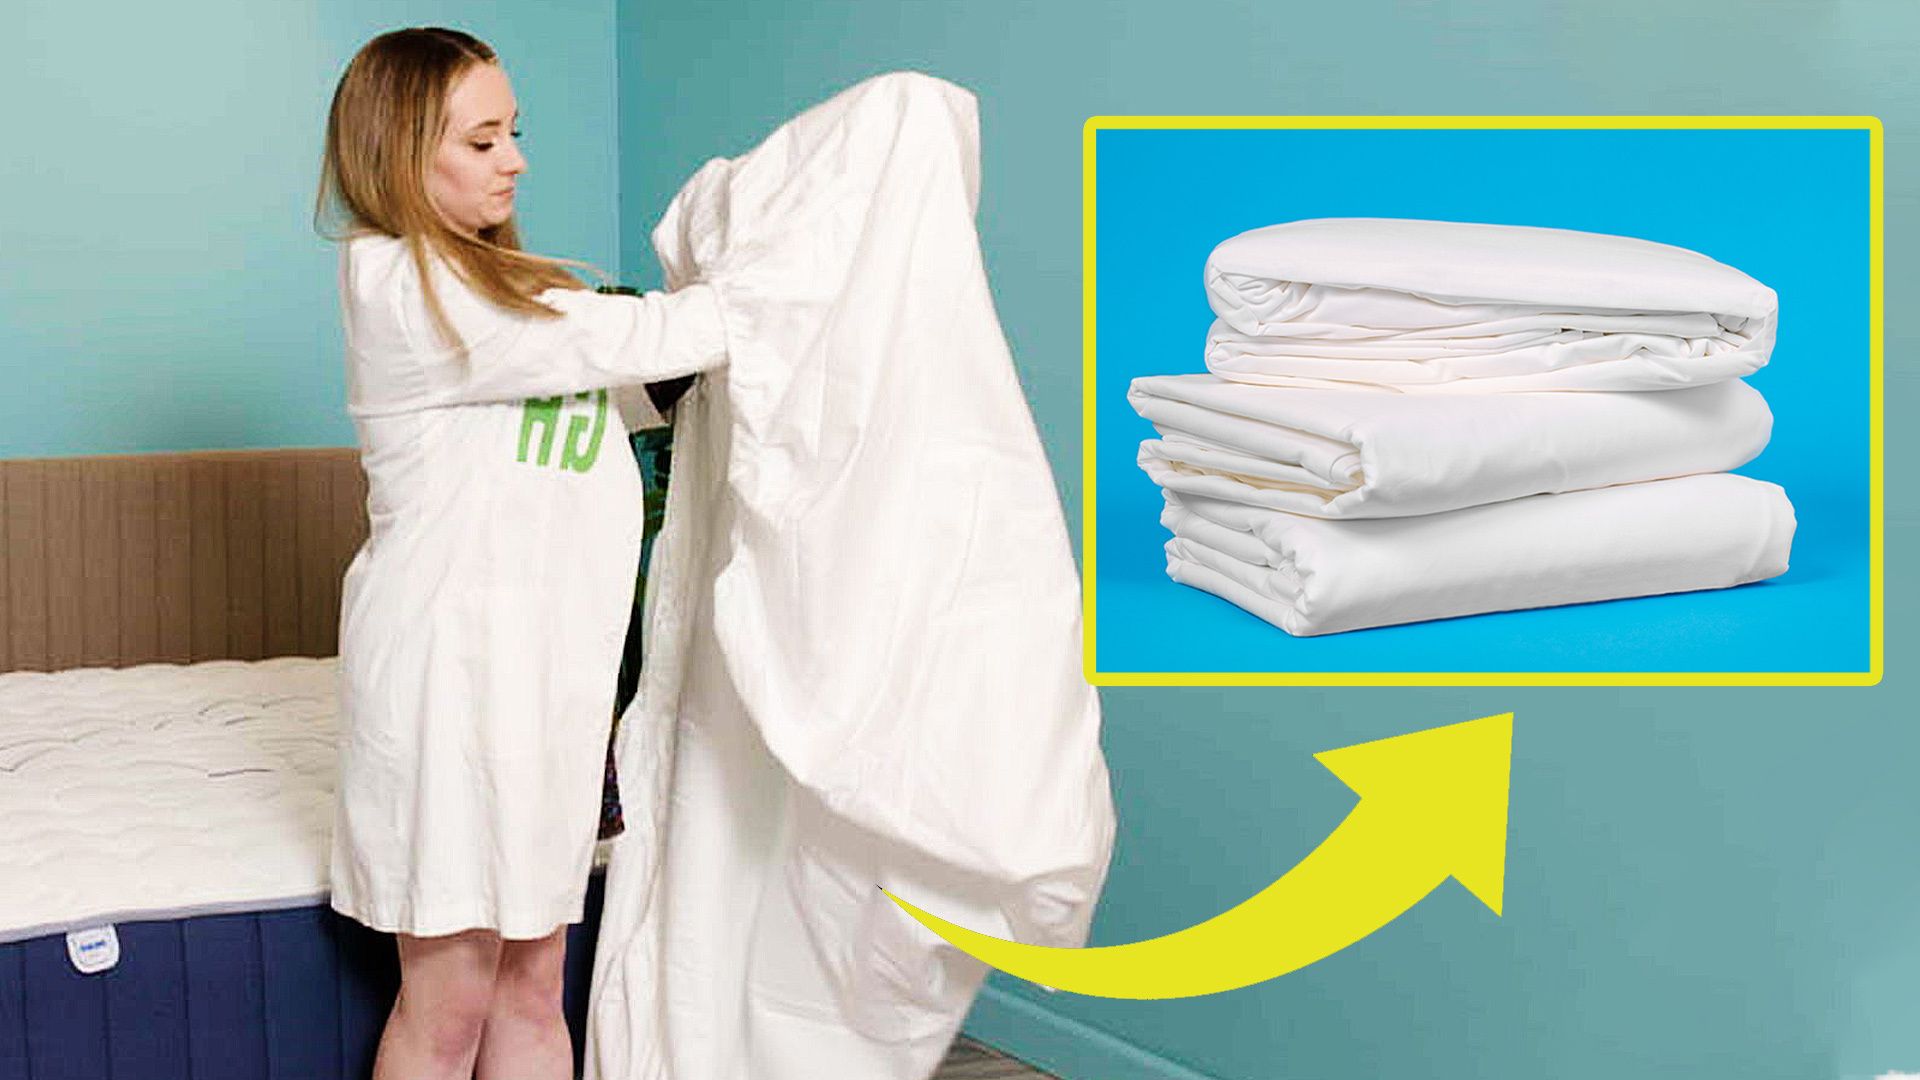 How to Fold Bed Sheets: Step-by-Step Instructions for Folding a Fitted Bed  Sheet